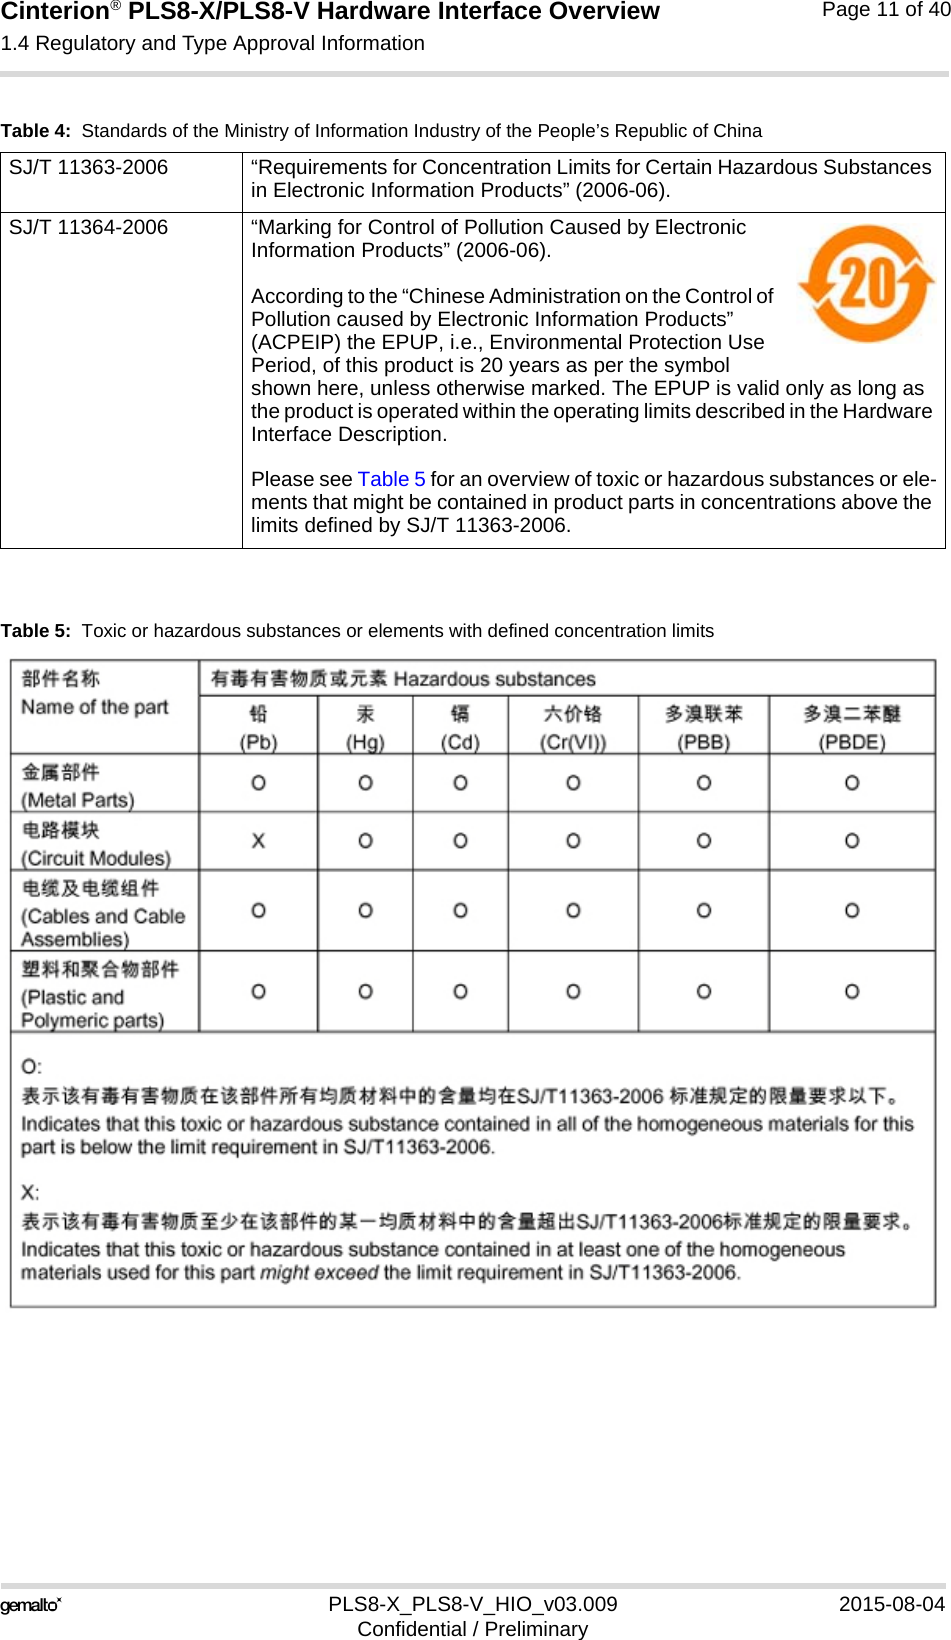 Cinterion® PLS8-X/PLS8-V Hardware Interface Overview1.4 Regulatory and Type Approval Information13PLS8-X_PLS8-V_HIO_v03.009 2015-08-04Confidential / PreliminaryPage 11 of 40Table 5:  Toxic or hazardous substances or elements with defined concentration limitsTable 4:  Standards of the Ministry of Information Industry of the People’s Republic of ChinaSJ/T 11363-2006  “Requirements for Concentration Limits for Certain Hazardous Substances in Electronic Information Products” (2006-06).SJ/T 11364-2006 “Marking for Control of Pollution Caused by Electronic Information Products” (2006-06).According to the “Chinese Administration on the Control of Pollution caused by Electronic Information Products” (ACPEIP) the EPUP, i.e., Environmental Protection Use Period, of this product is 20 years as per the symbol shown here, unless otherwise marked. The EPUP is valid only as long as the product is operated within the operating limits described in the Hardware Interface Description.Please see Table 5 for an overview of toxic or hazardous substances or ele-ments that might be contained in product parts in concentrations above the limits defined by SJ/T 11363-2006. 